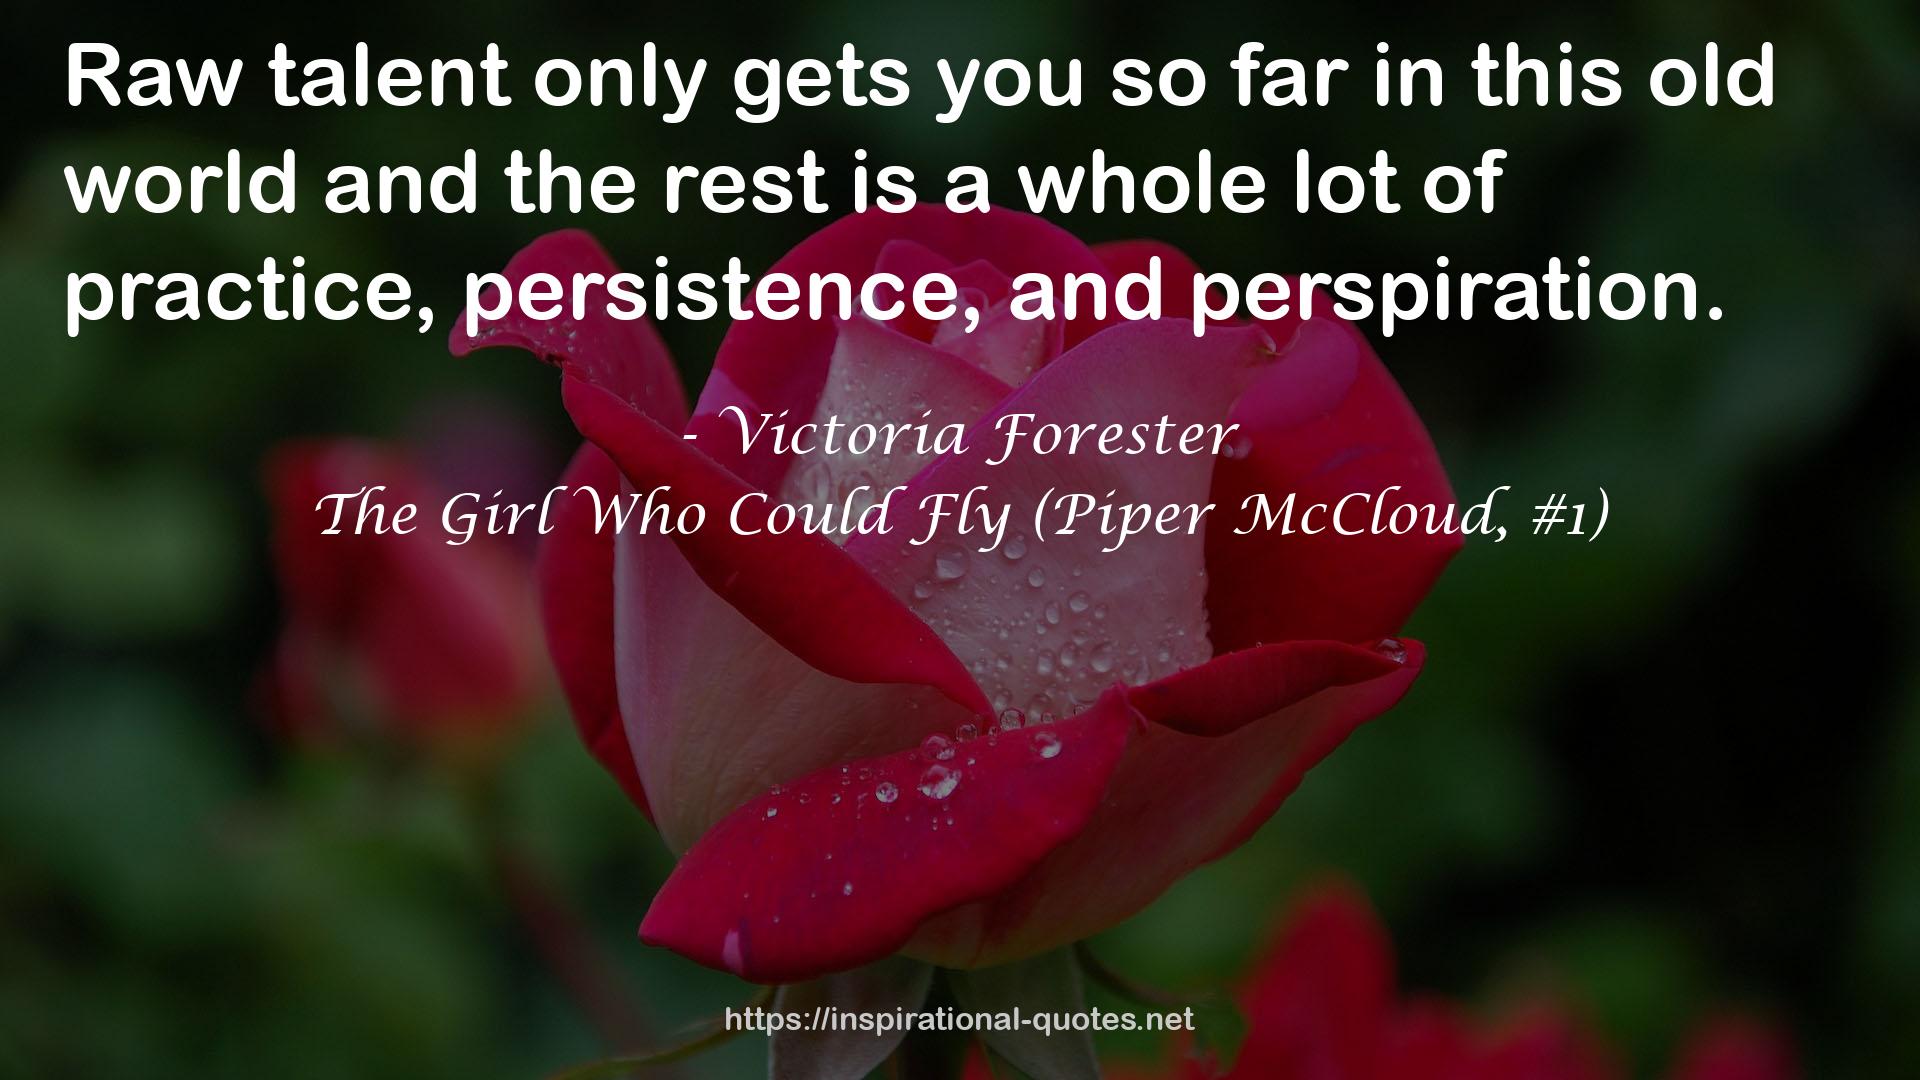 Victoria Forester QUOTES